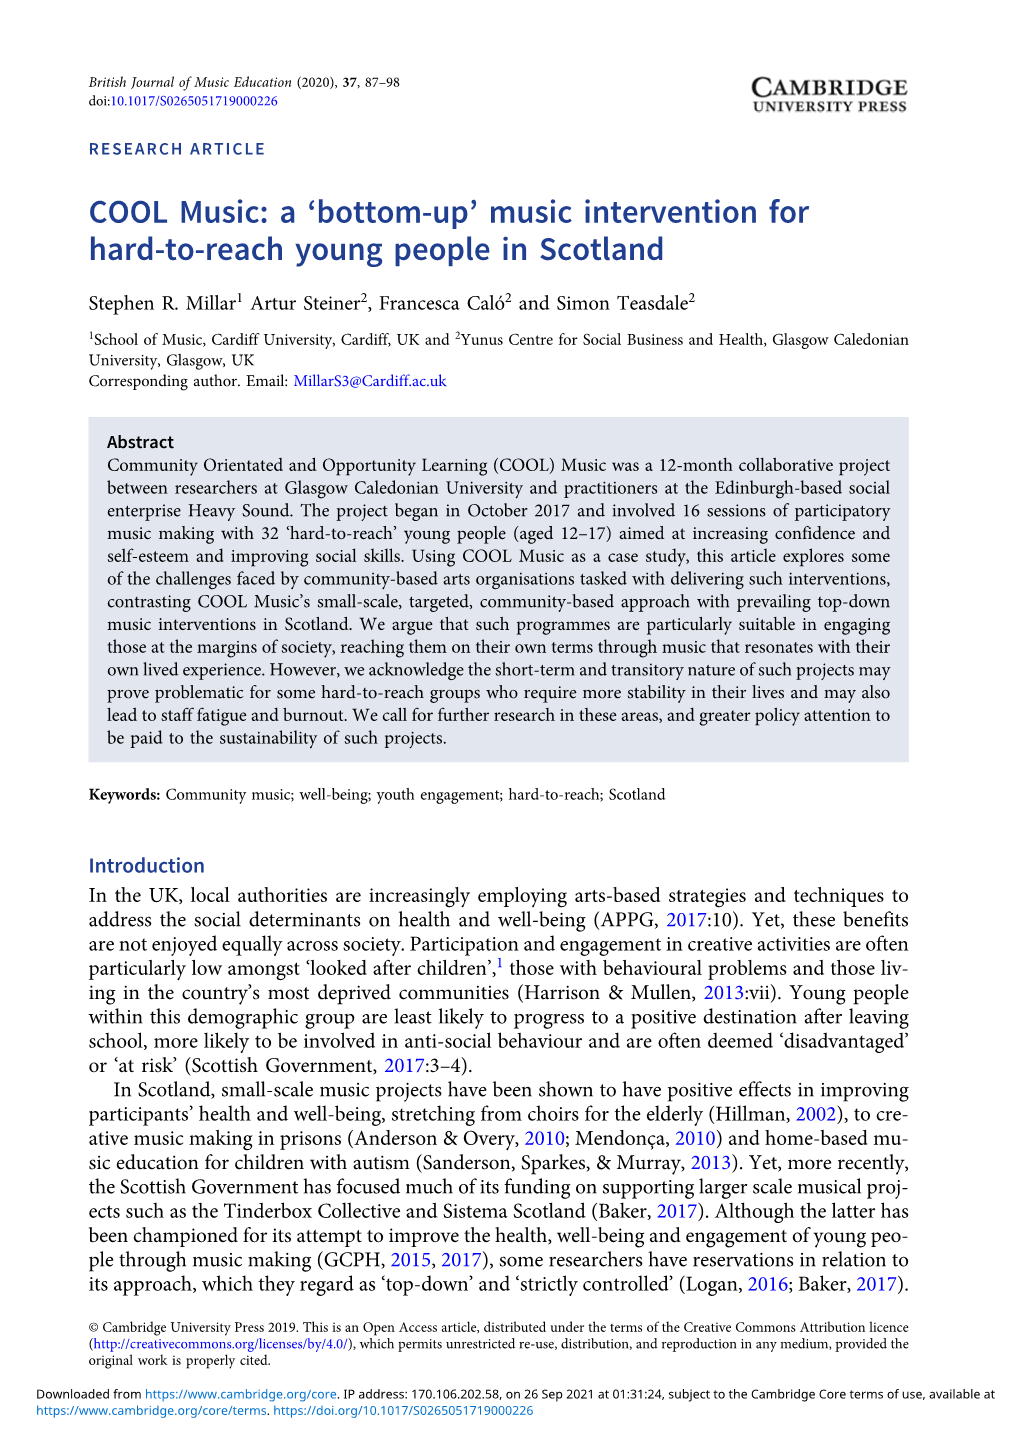 Music Intervention for Hard-To-Reach Young People in Scotland